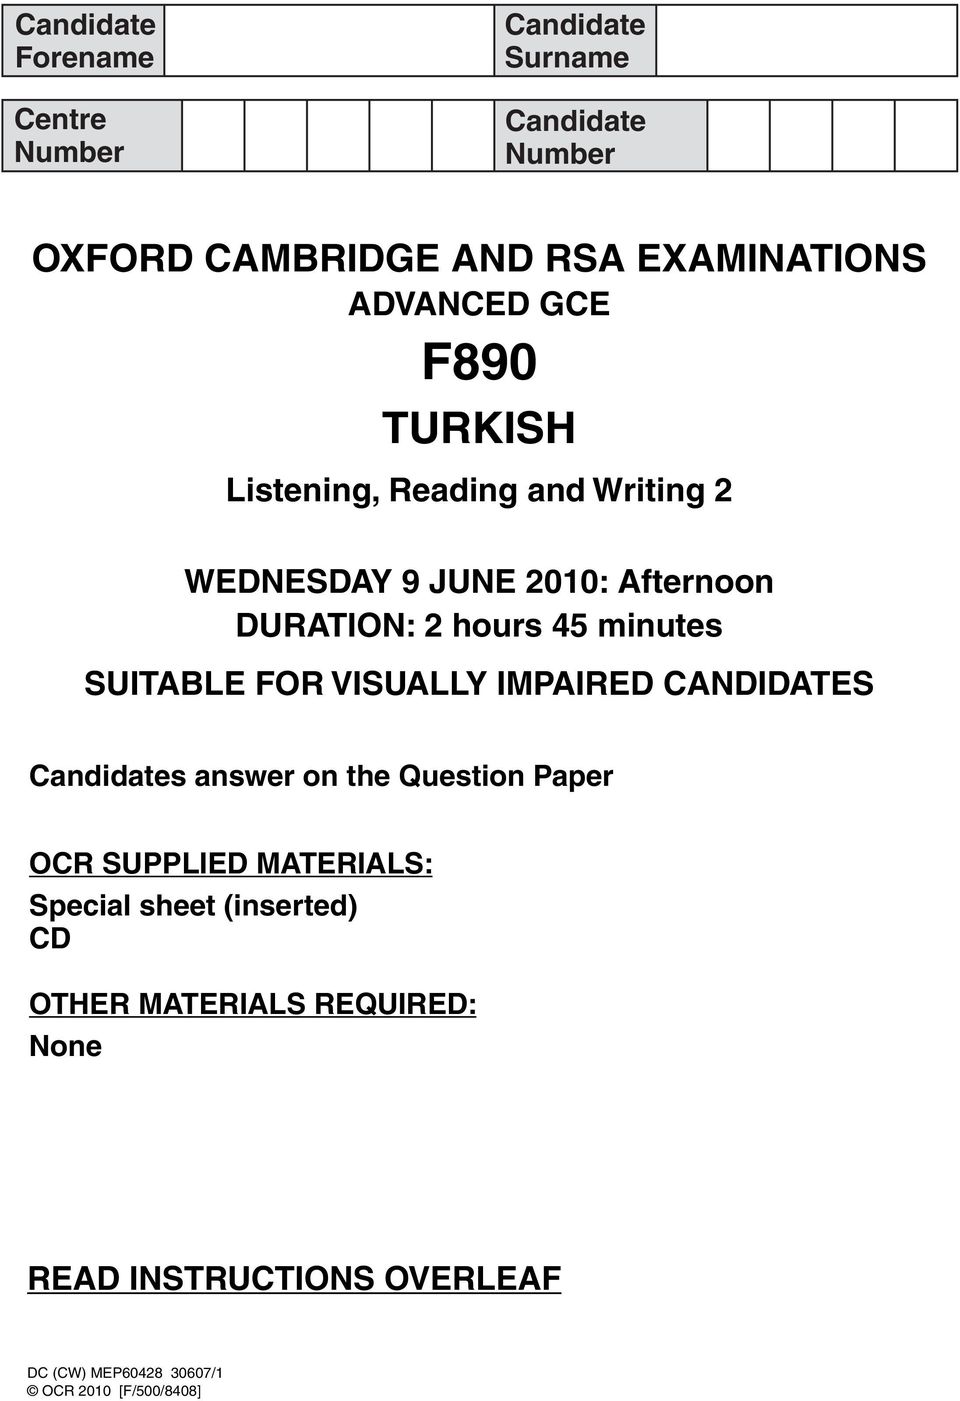 SUITABLE FOR VISUALLY IMPAIRED CANDIDATES Candidates answer on the Question Paper OCR SUPPLIED MATERIALS: Special